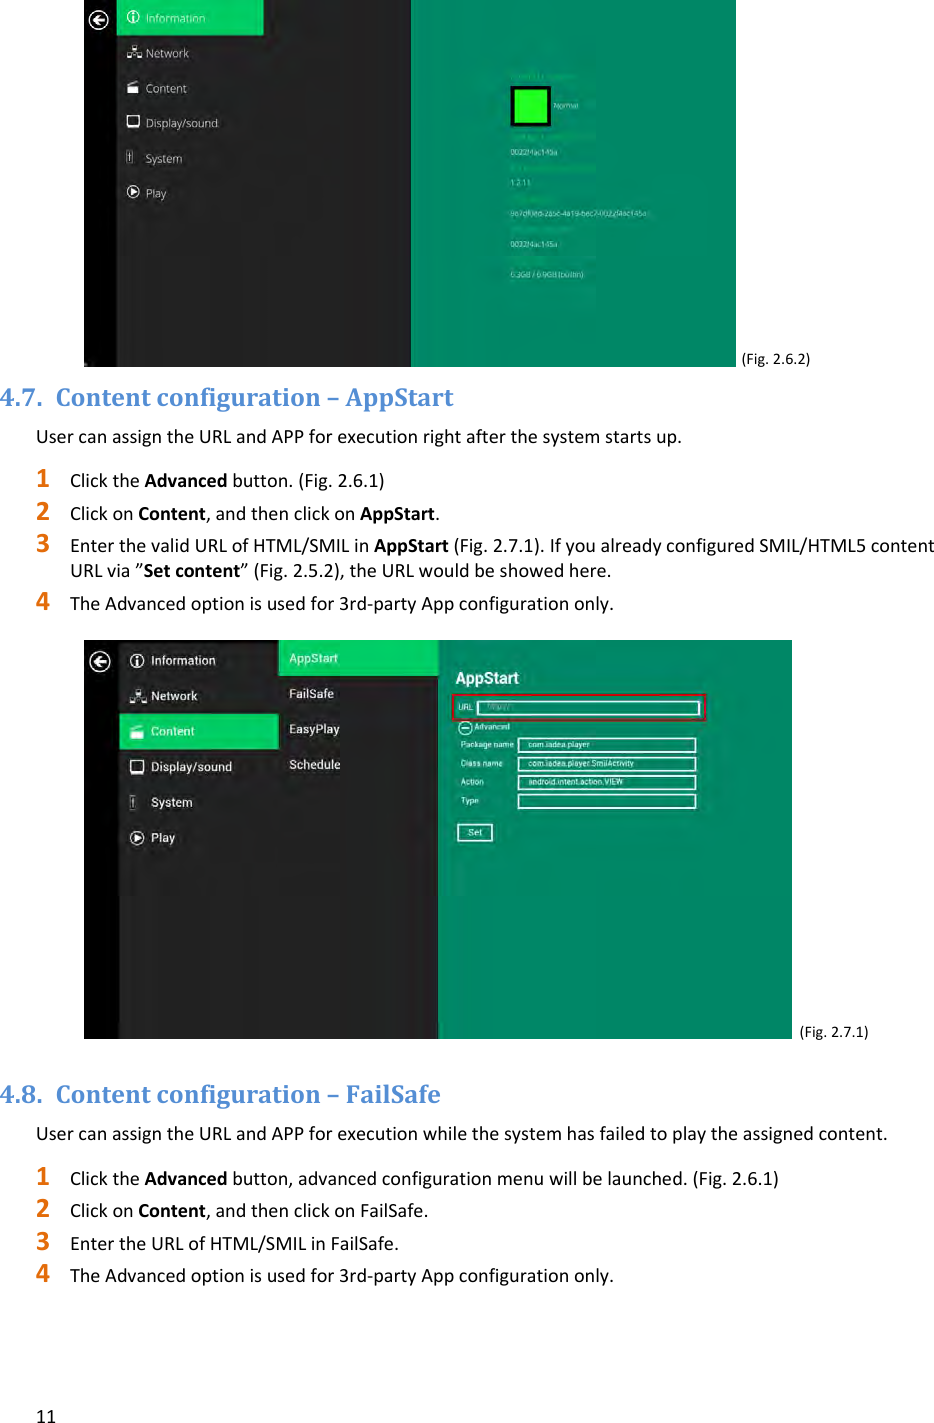 11(Fig.2.6.2)4.7. Contentconfiguration–AppStartUsercanassigntheURLandAPPforexecutionrightafterthesystemstartsup.1 ClicktheAdvancedbutton.(Fig.2.6.1)2 ClickonContent,andthenclickonAppStart.3 EnterthevalidURLofHTML/SMILinAppStart(Fig.2.7.1).IfyoualreadyconfiguredSMIL/HTML5contentURLvia”Setcontent”(Fig.2.5.2),theURLwouldbeshowedhere.4 TheAdvancedoptionisusedfor3rd‐partyAppconfigurationonly.(Fig.2.7.1)4.8. Contentconfiguration–FailSafeUsercanassigntheURLandAPPforexecutionwhilethesystemhasfailedtoplaytheassignedcontent.1 ClicktheAdvancedbutton,advancedconfigurationmenuwillbelaunched.(Fig.2.6.1)2 ClickonContent,andthenclickonFailSafe.3 EntertheURLofHTML/SMILinFailSafe.4 TheAdvancedoptionisusedfor3rd‐partyAppconfigurationonly.